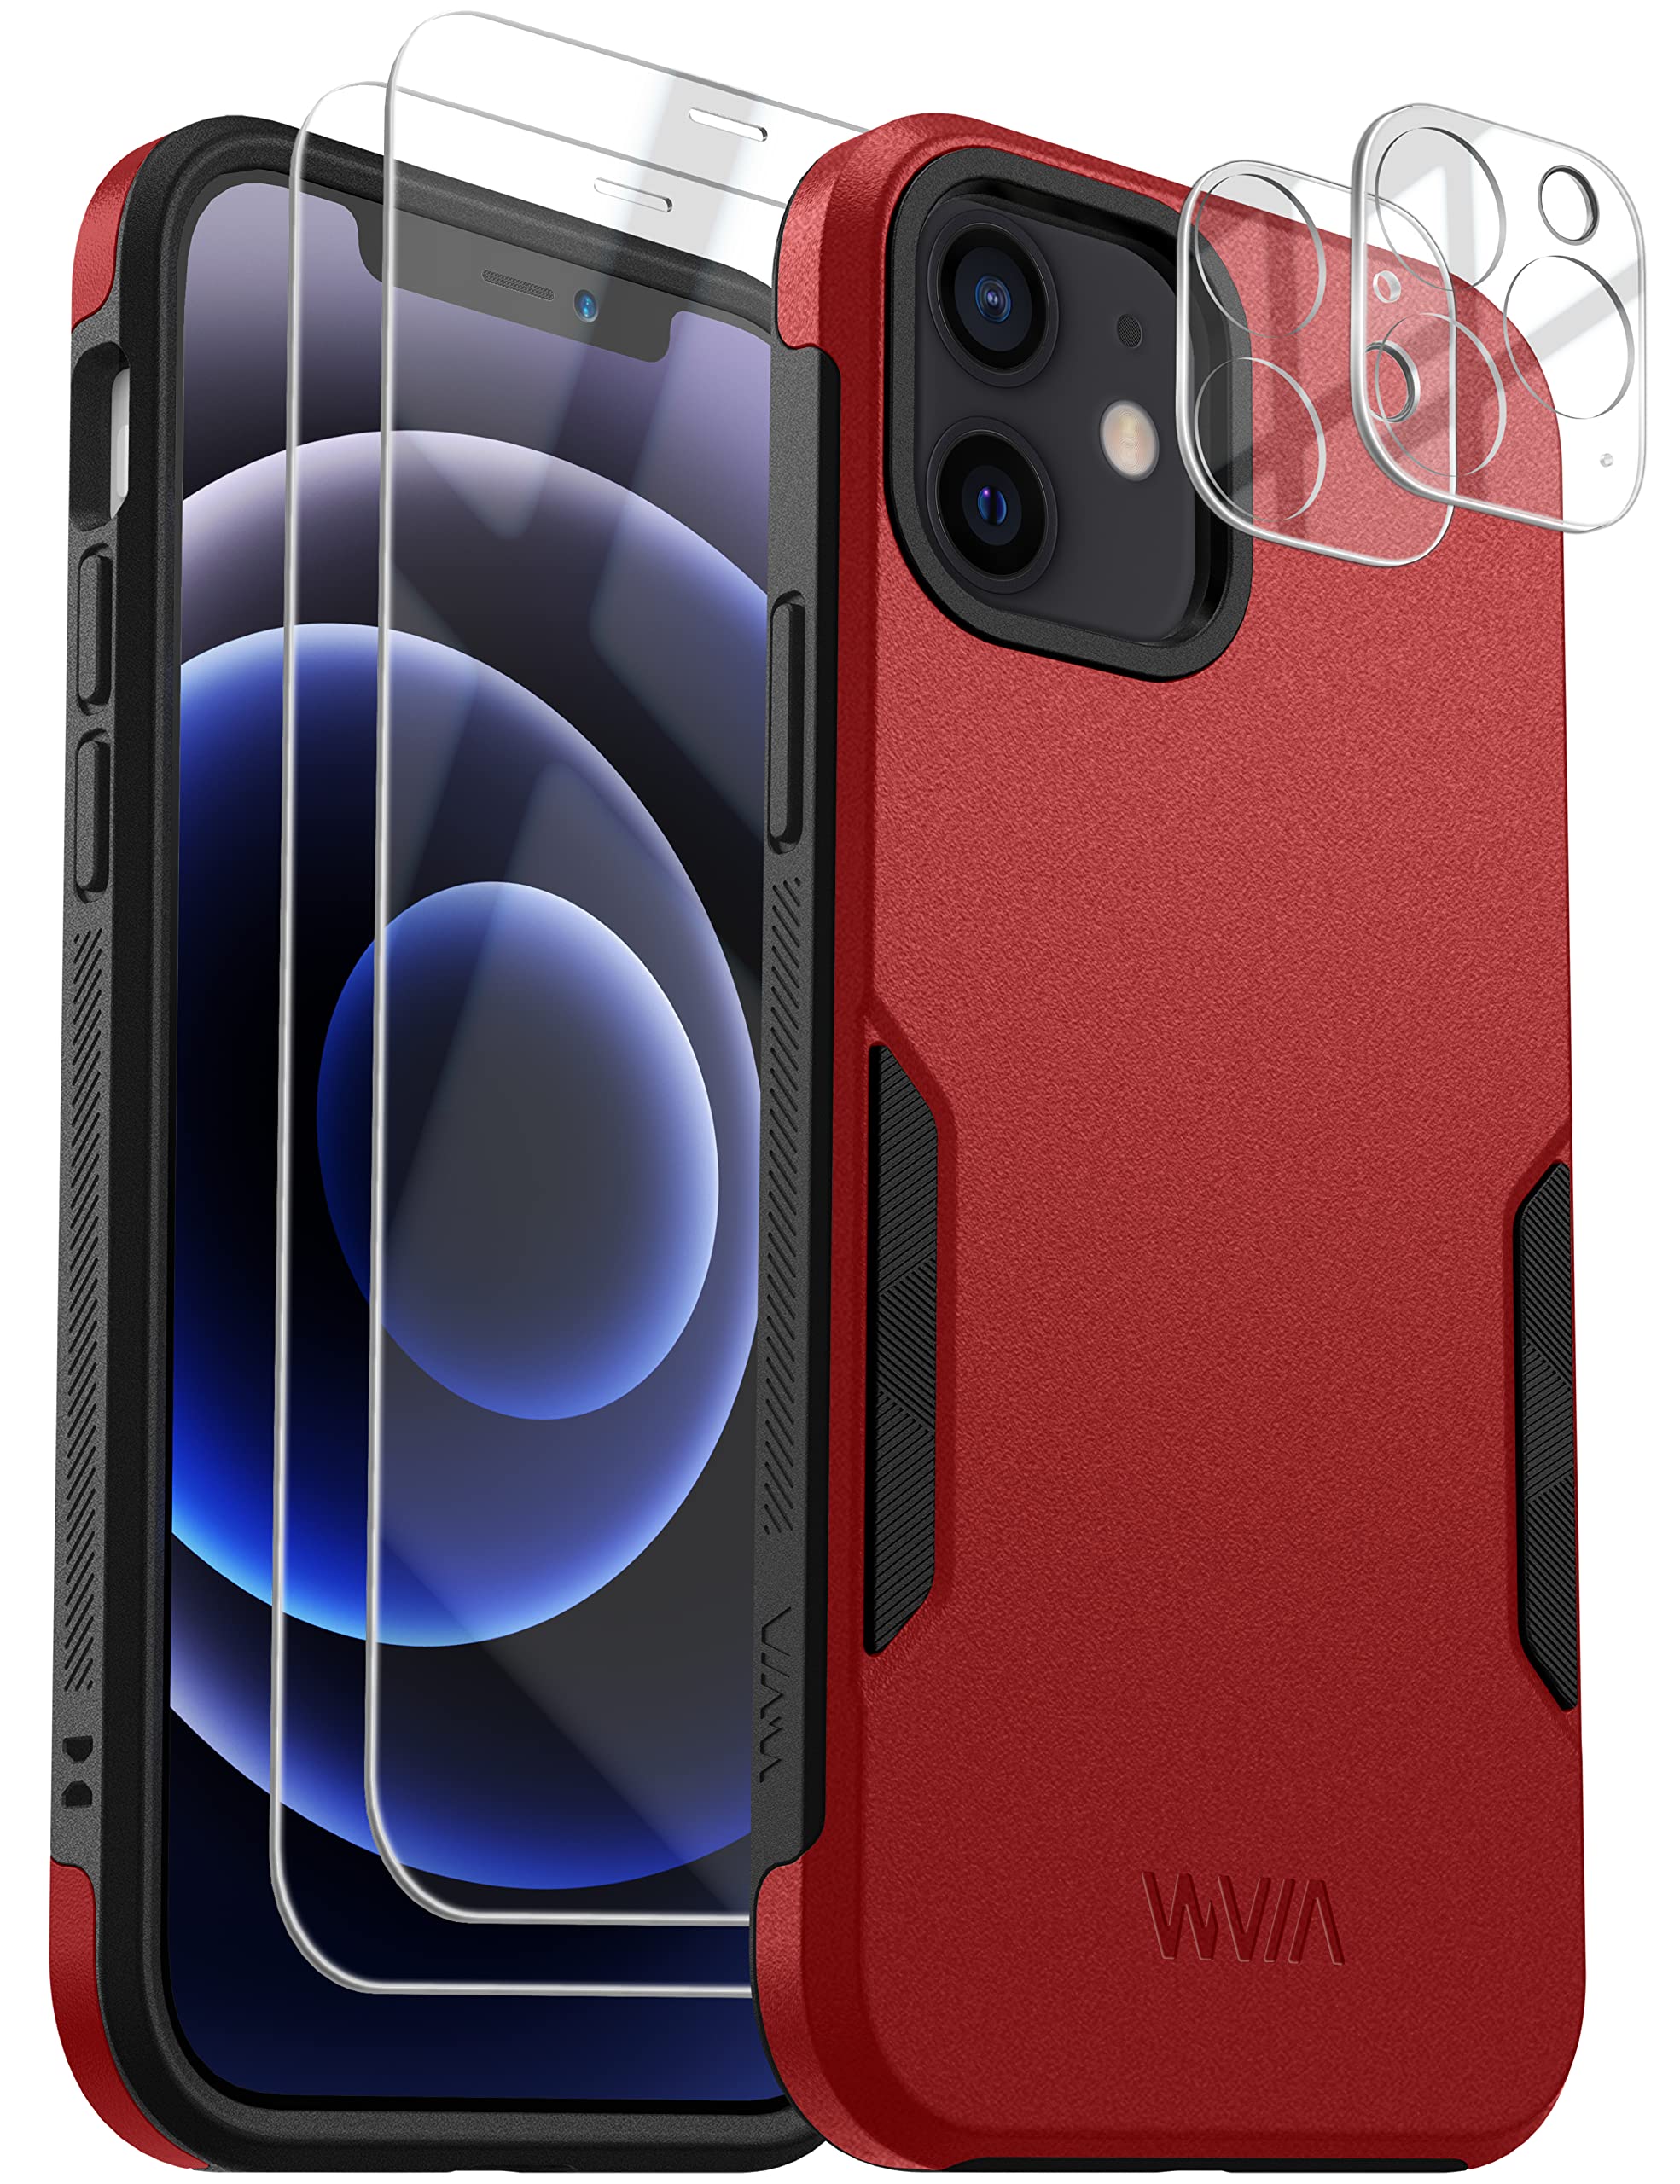 WVM for iPhone 12 case & iPhone 12 Pro Case with 2 Screen Protectors+2 Camera Lens Protectors, Protective Heavy Duty iPhone 12 Case 6.1 inch and iPhone 12 Pro Case 6.1 inch, Red